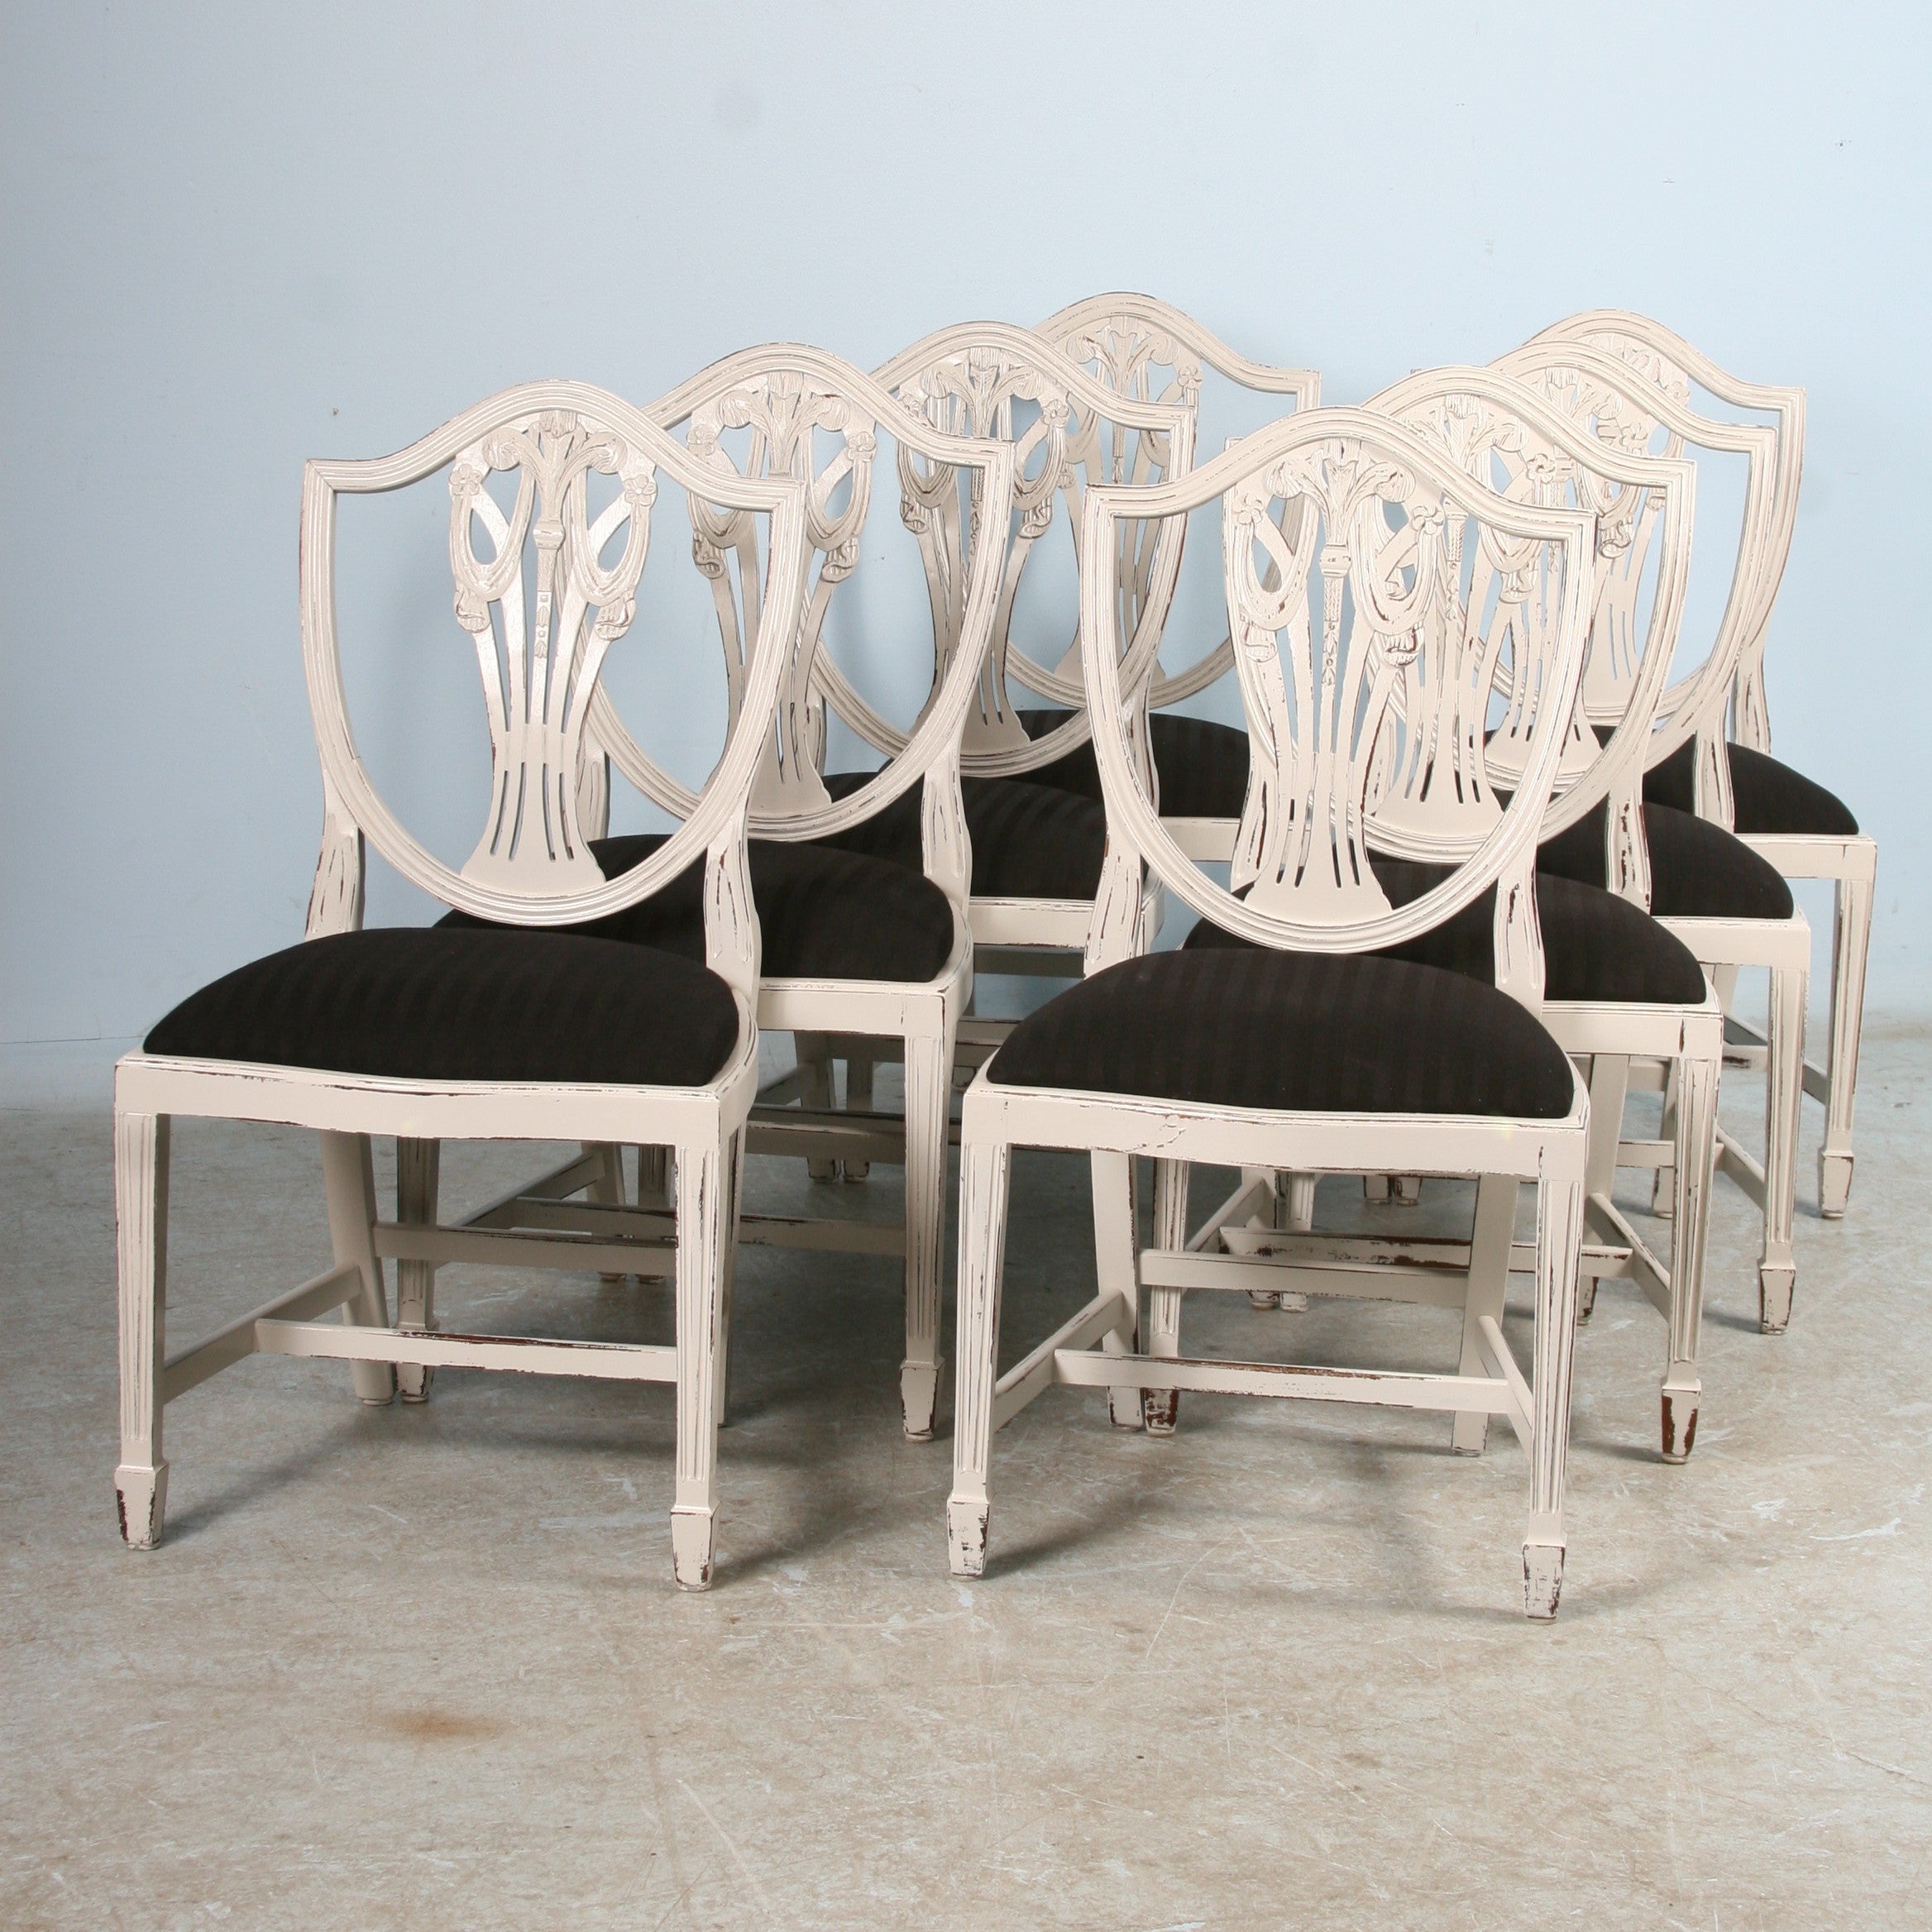 Antique Set of 8 Swedish Chairs, Circa 1920-40, Painted White in Gustavian Style